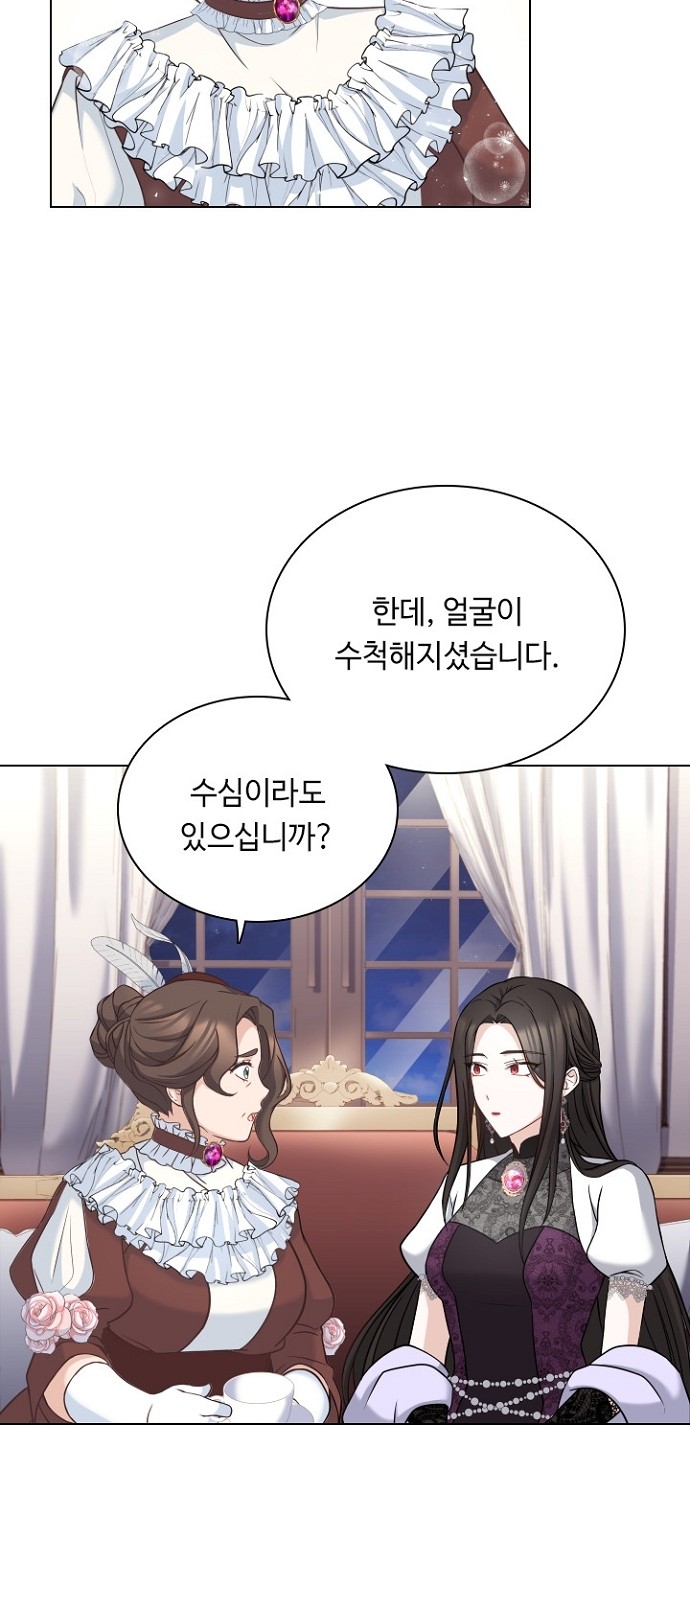 His Majesty's Proposal (A Night With the Emperor) - Chapter 40 - Page 3